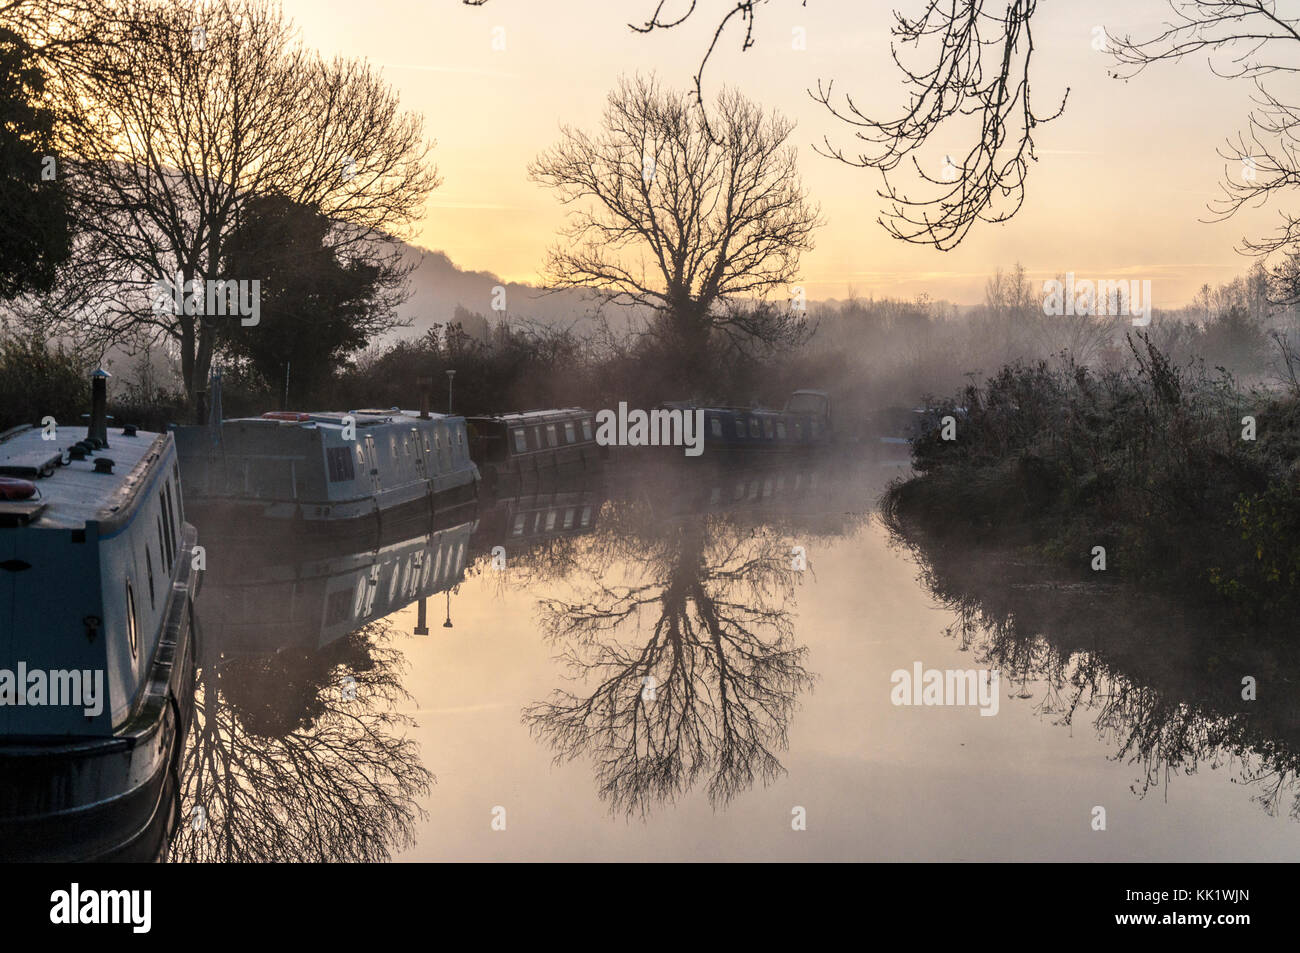 Misty early morning reflections on Kennet and Avon Canal at Bathampton, Somerset, England, UK Stock Photo